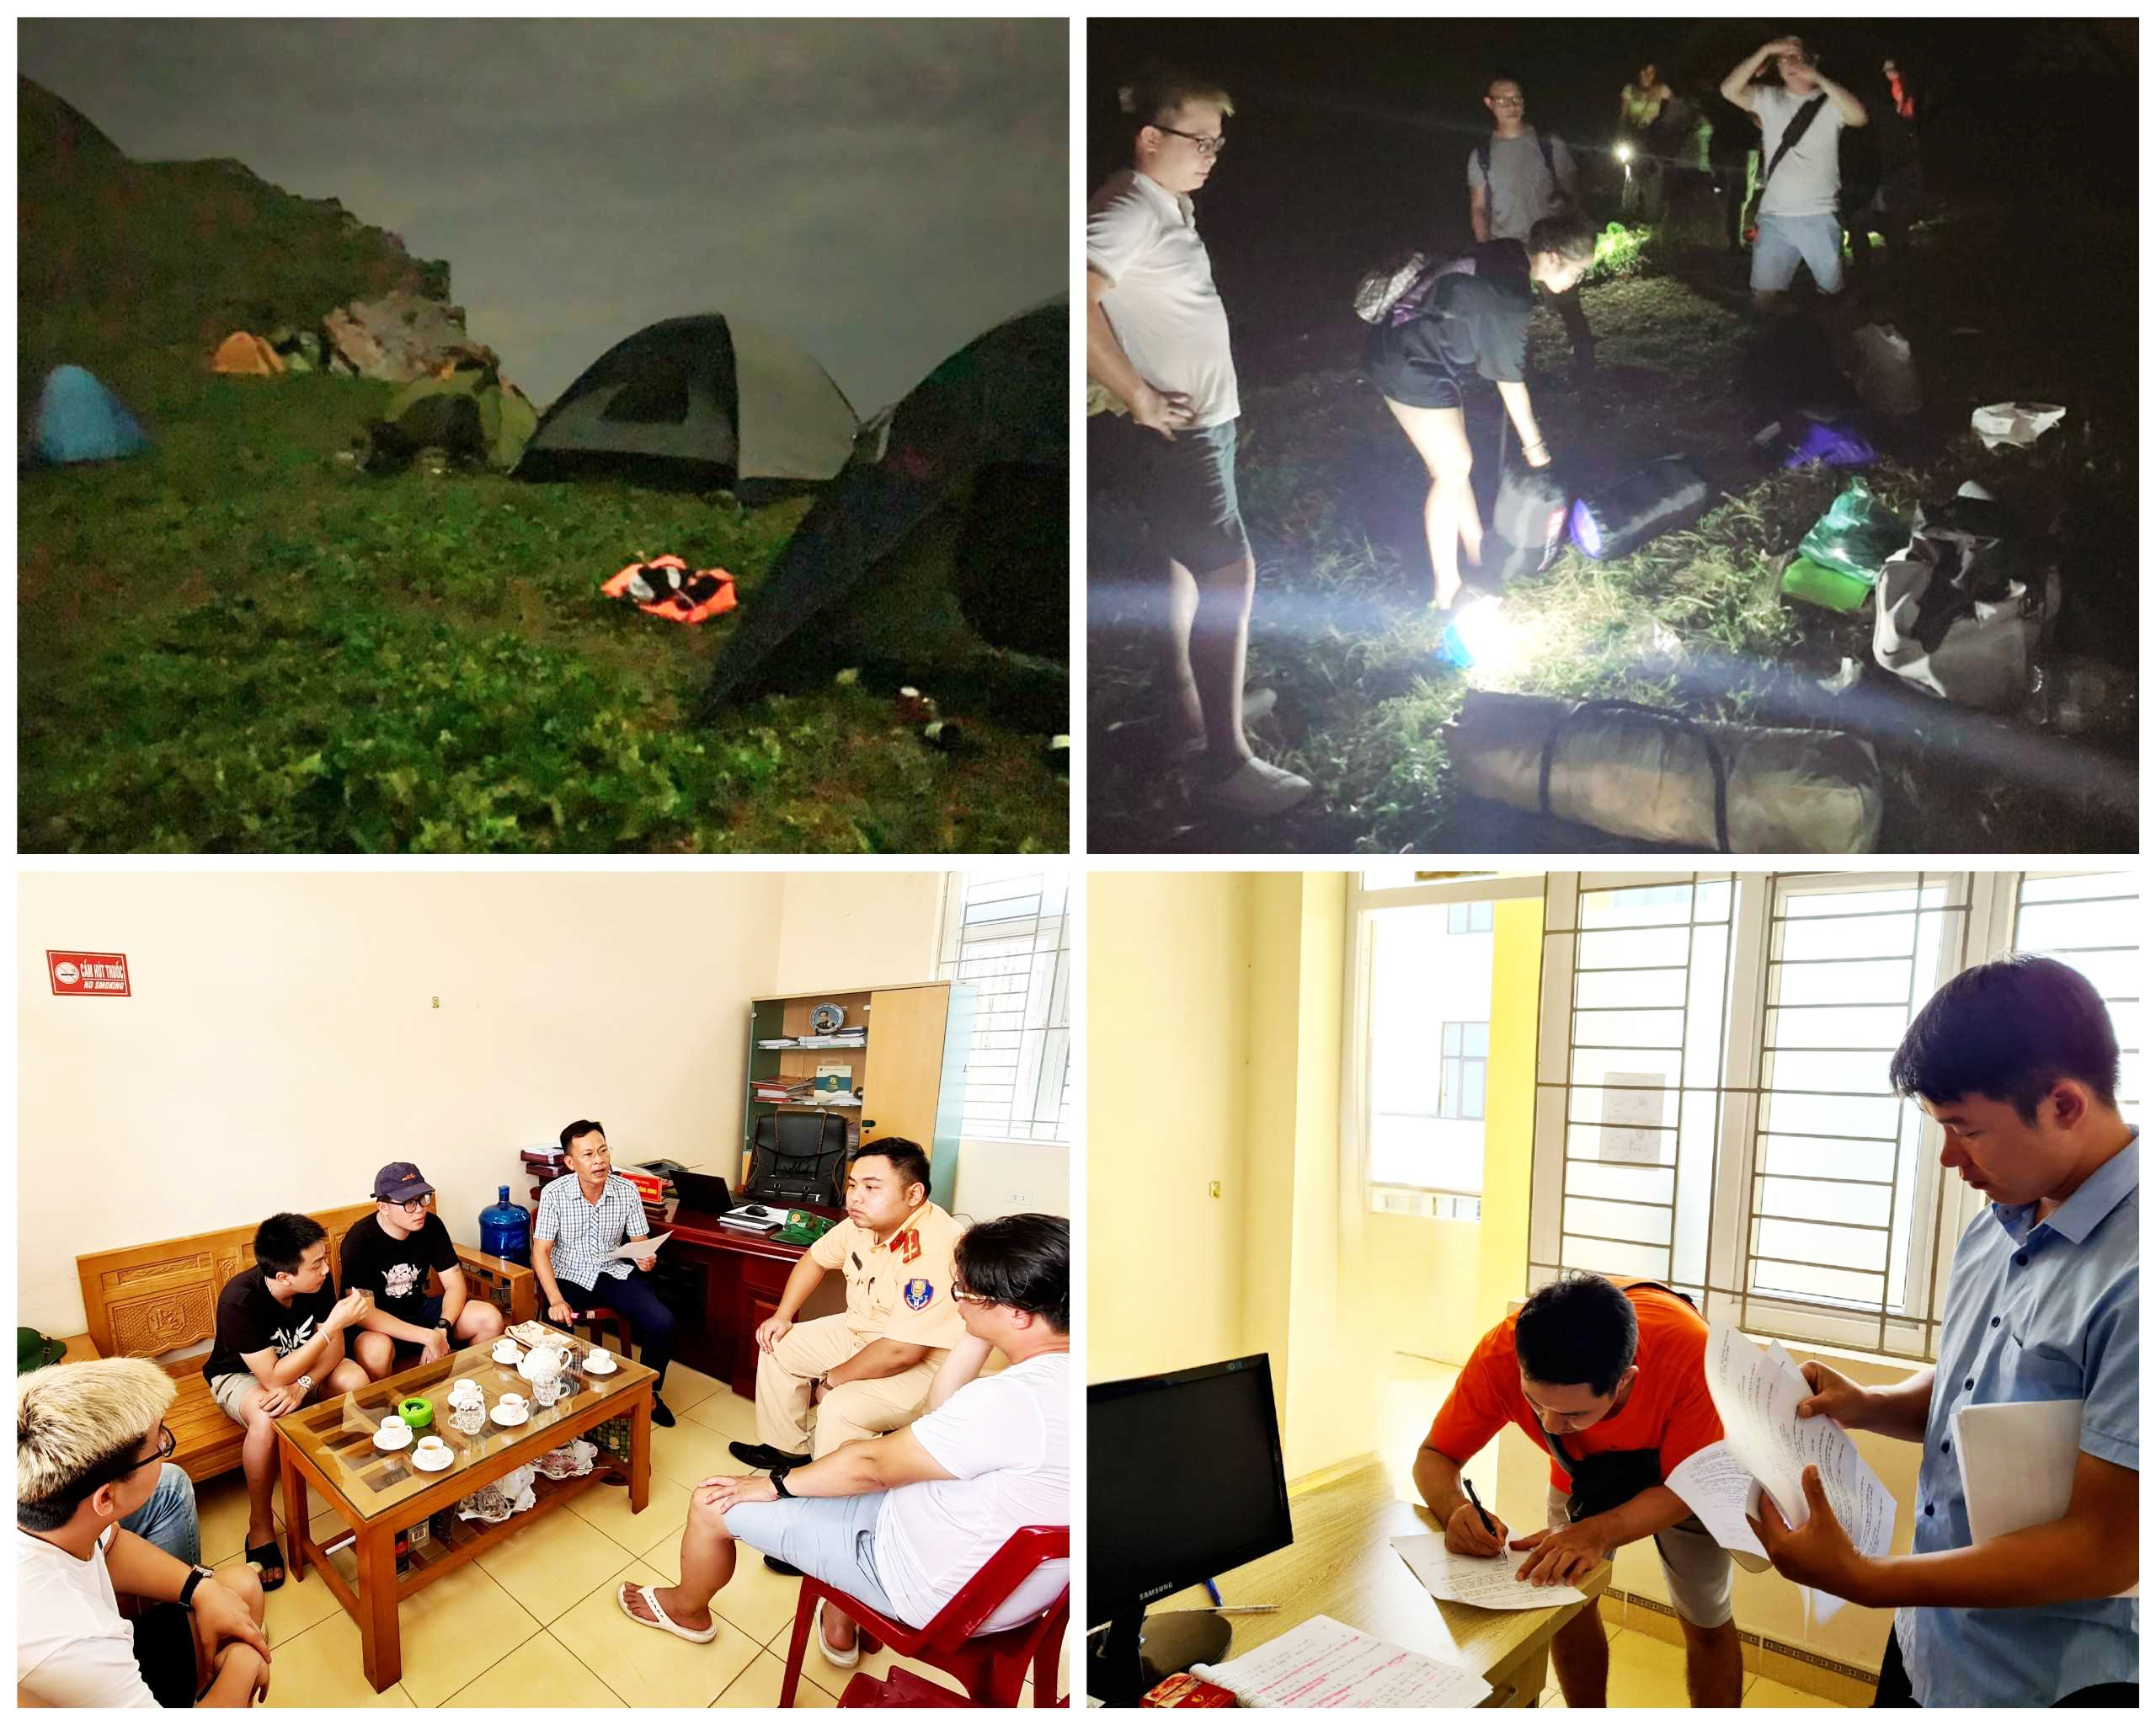 12 tourists fined for illegal camping on border island in northern Vietnam